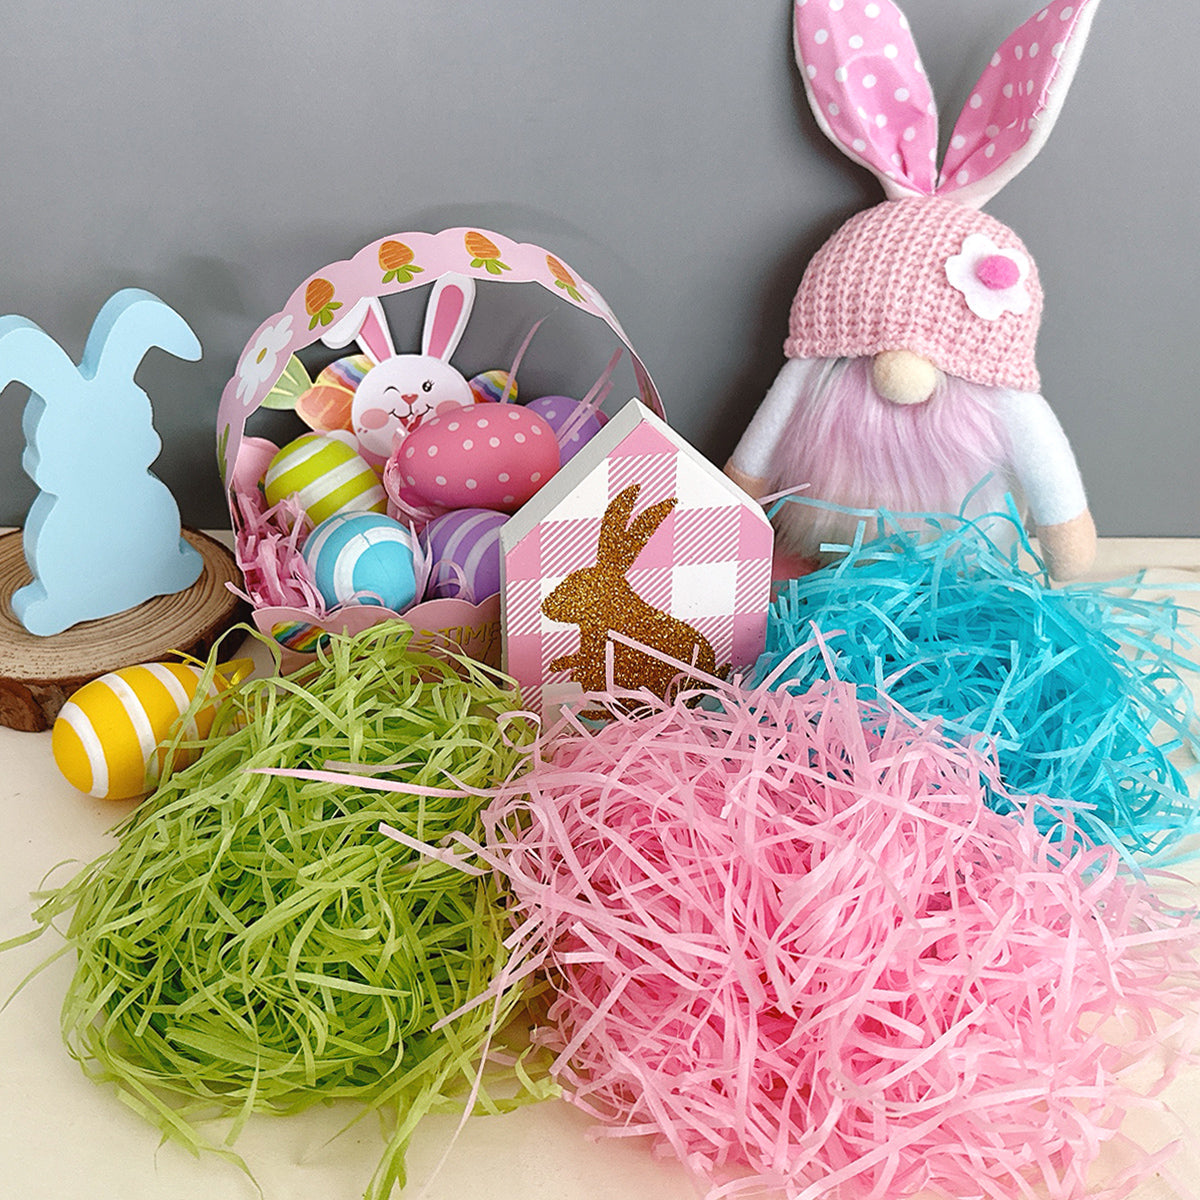 Wrapables Easter Grass Package Filler, Shredded Paper for Gift Wrappin